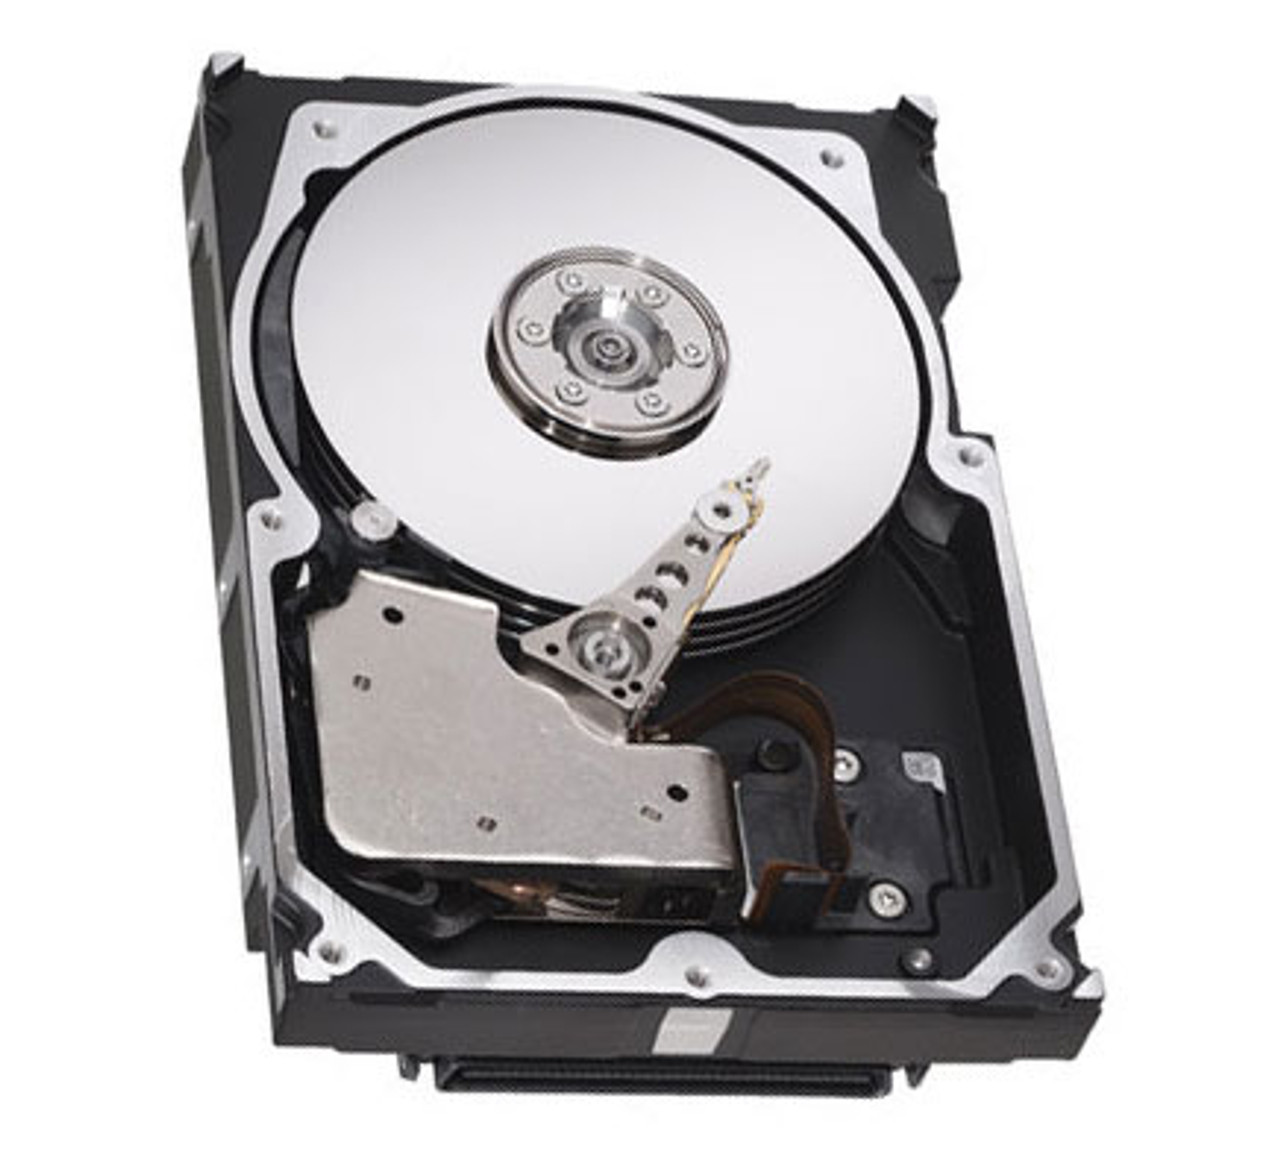 C5716 Dell 73GB 10000RPM Ultra-320 SCSI 80-Pin Hot Swap 8MB Cache 3.5-inch Internal Hard Drive with Tray